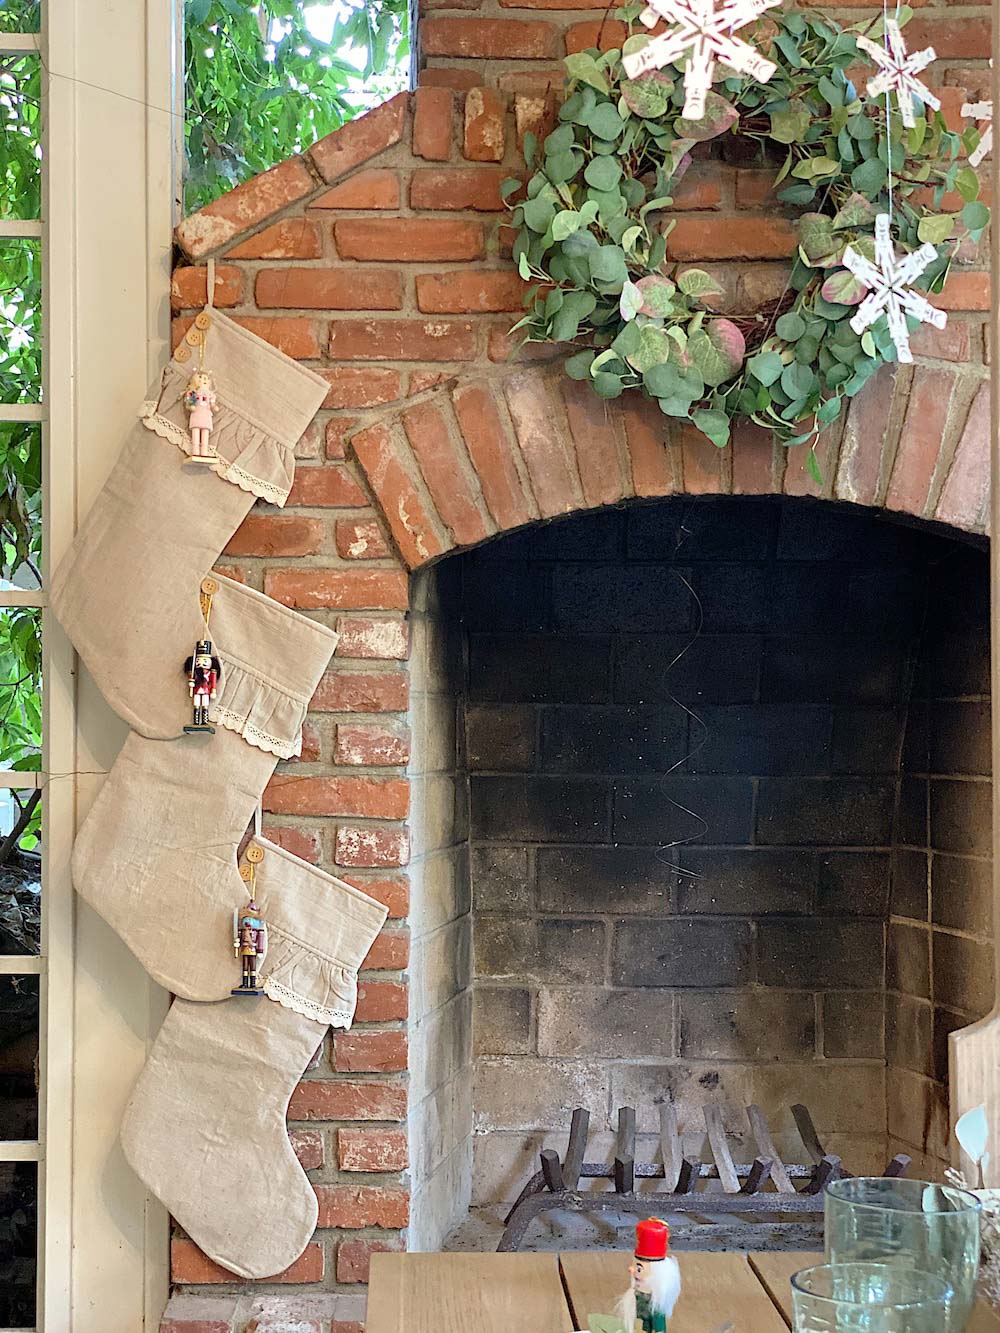  Fireplace decorated with stockings and a wreath